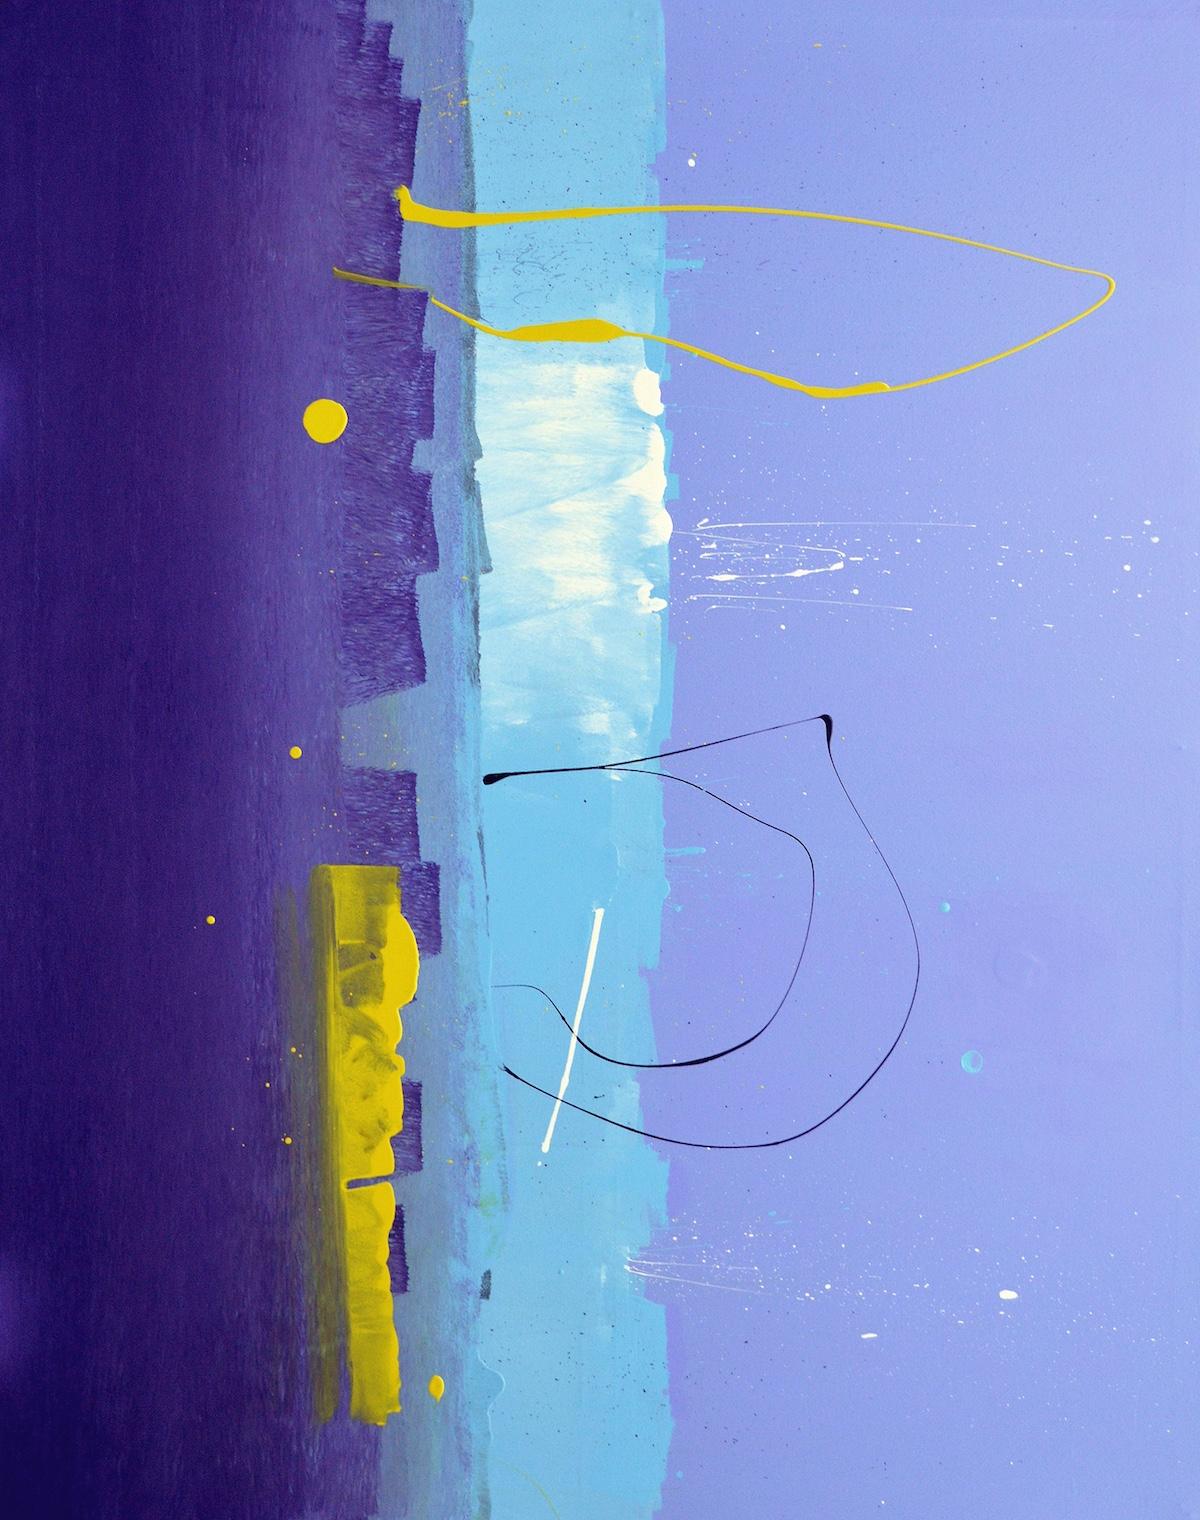 Anthony Hunter
61 Deep Abstract Painting
Gloss on Panel
60 x 75 inches, piece can be vertical or horizontal

Anthony Hunter was born in Lancashire, England 1987. He graduated from Leeds Metropolitan University in 2009 from the ‘Contemporary Art